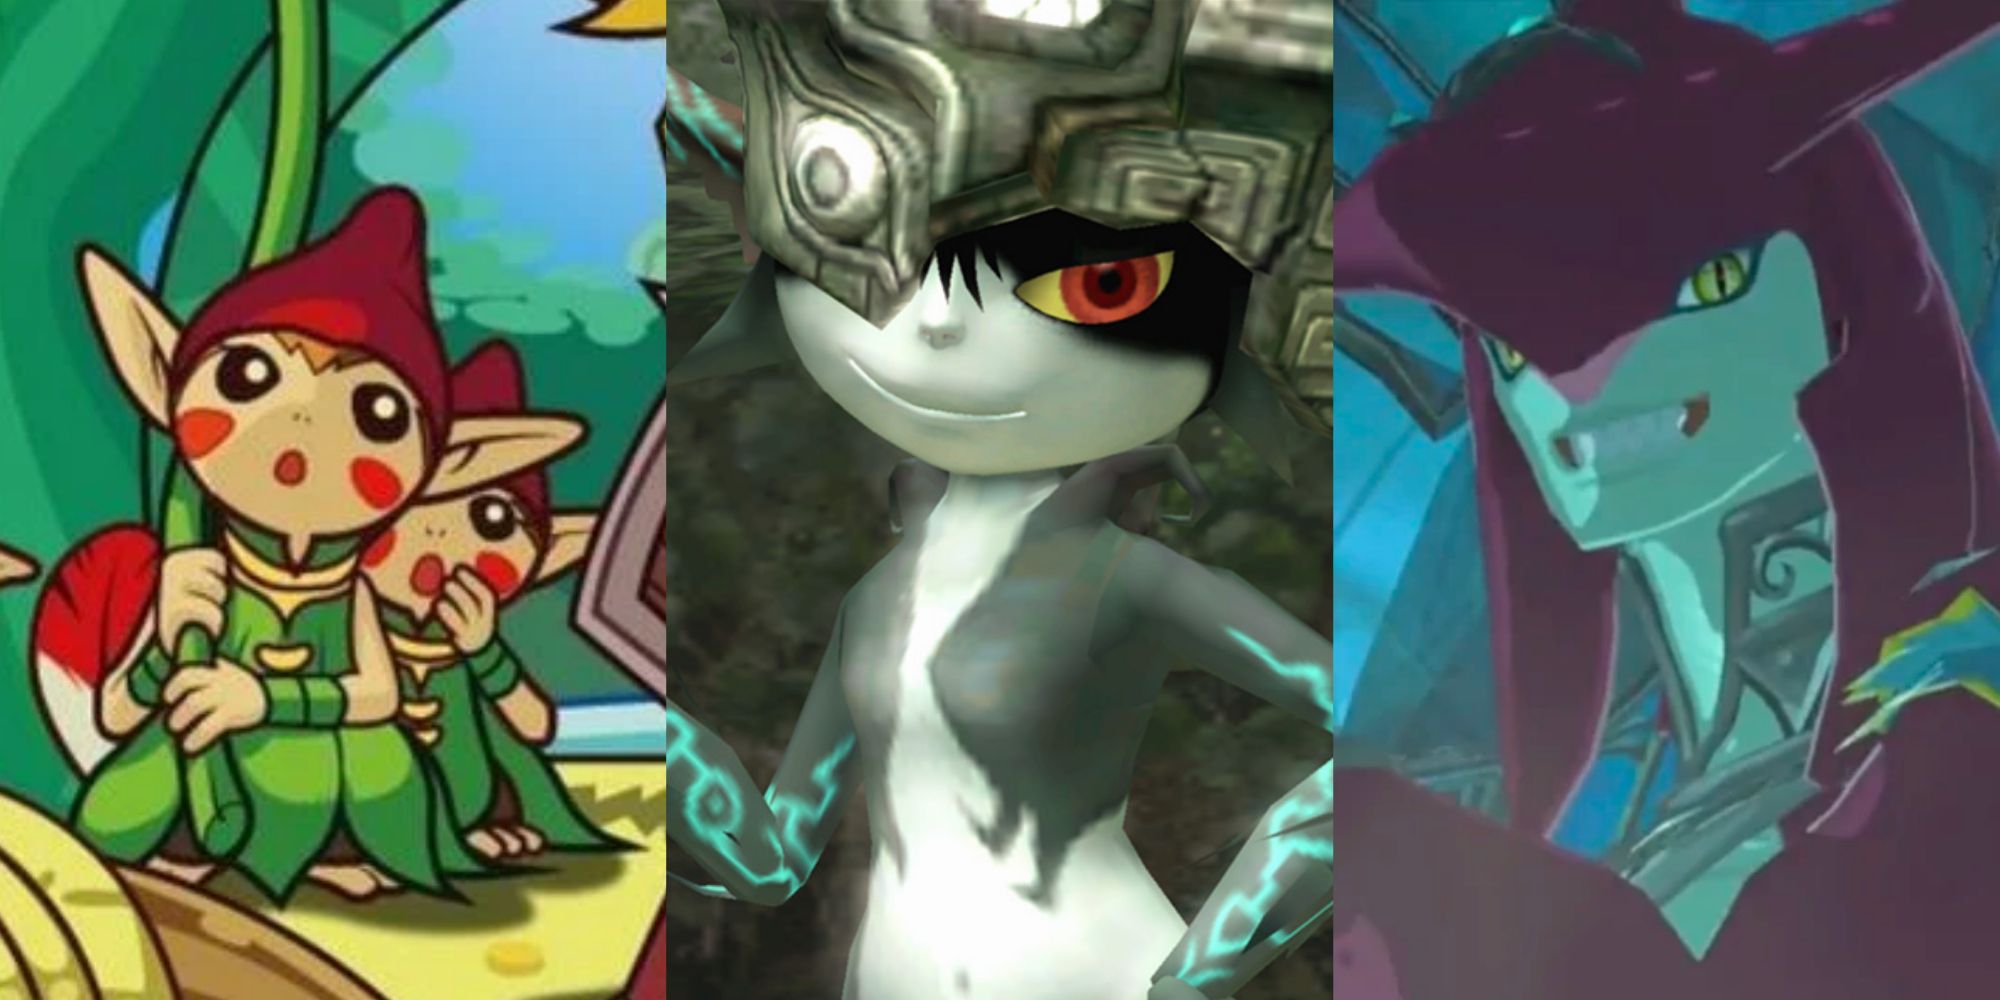 Split image screenshots of various Minish from The Minish Cap, a close up of Midna from Twilight Princess, and close up of Sidon from Breath of the Wild.